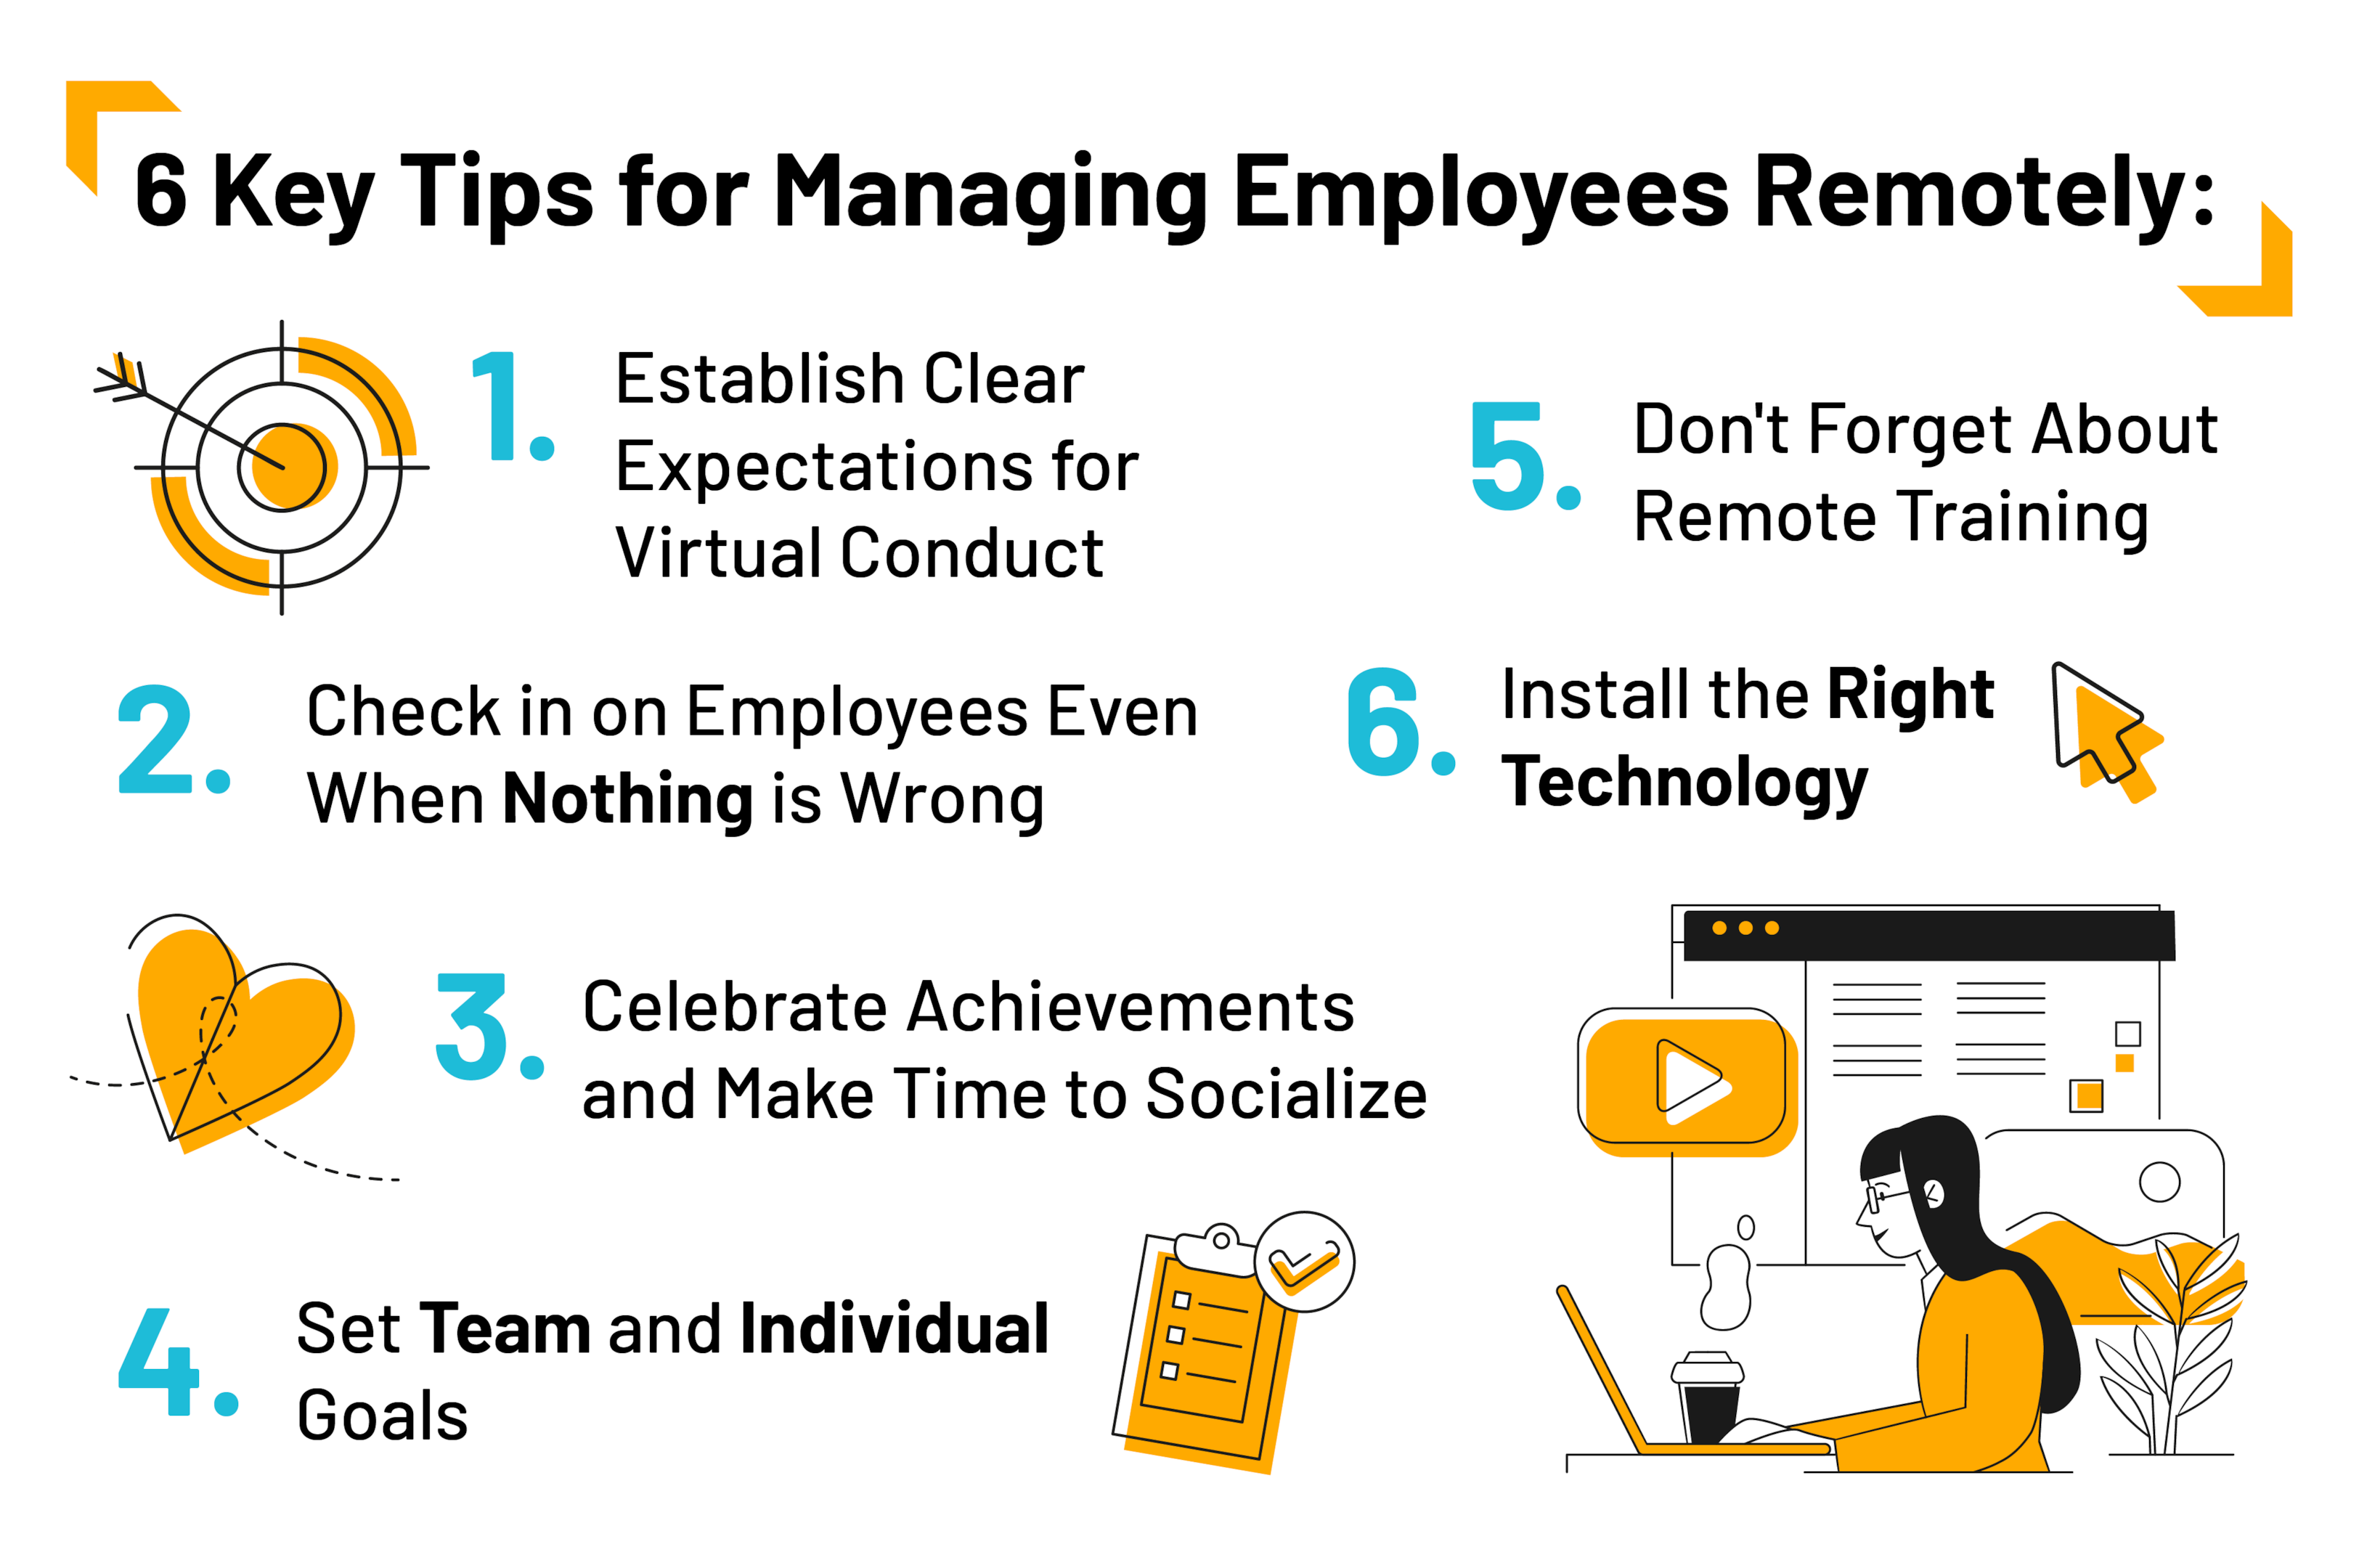 To keep your remote employees engaged, include socializing time in your team meetings, for instance.